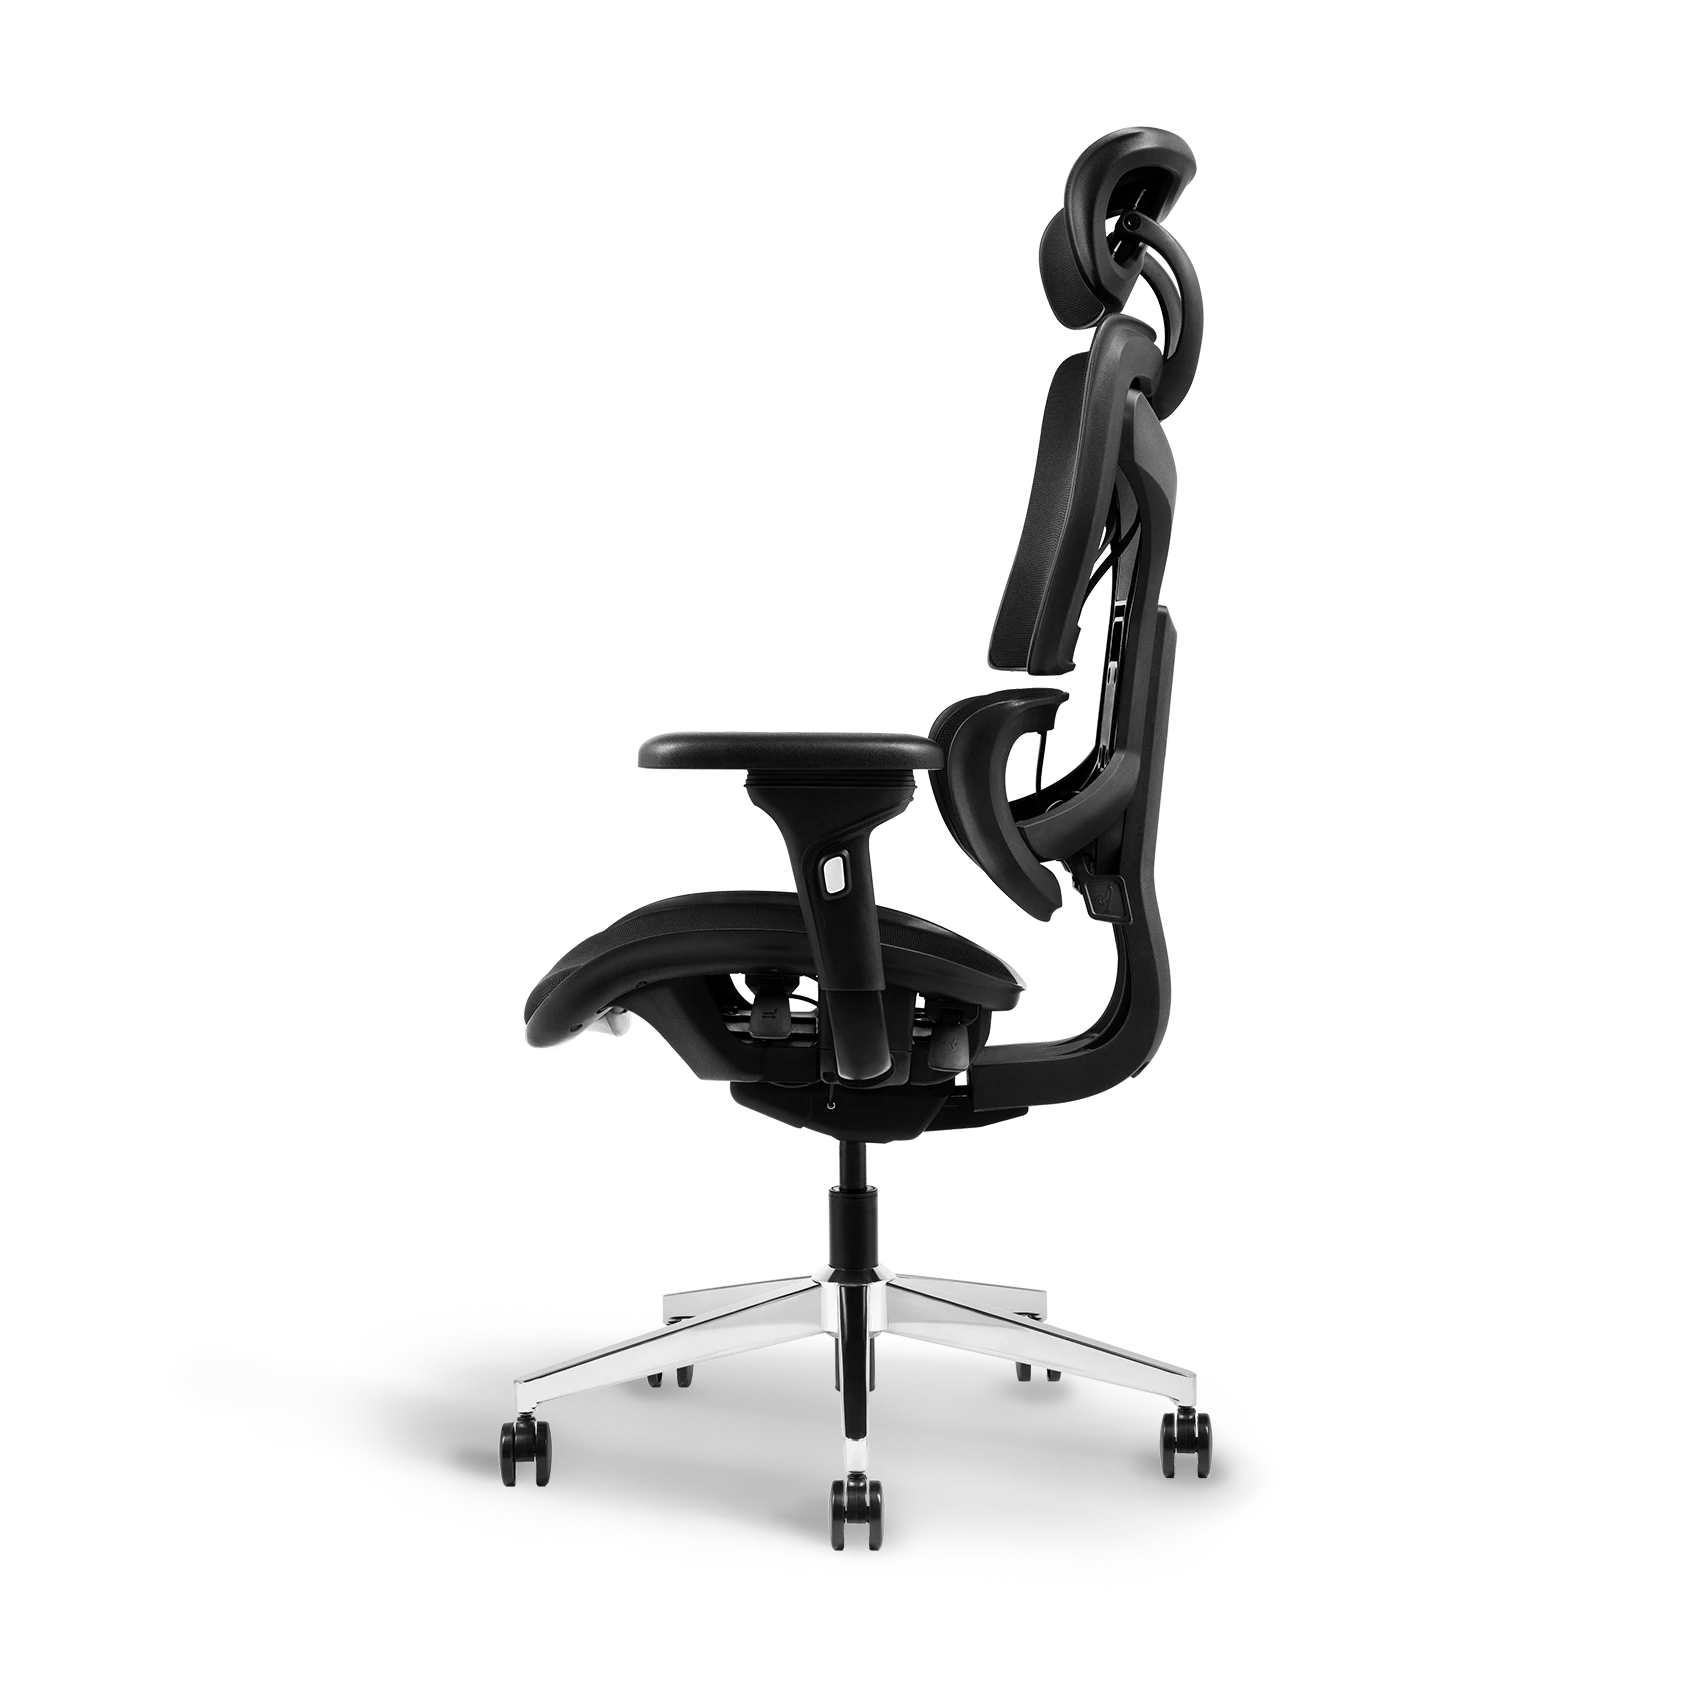 Angled view of Ayla Ergonomic Chair Black with detailed view of the seat depth adjustment and armrest customization features.